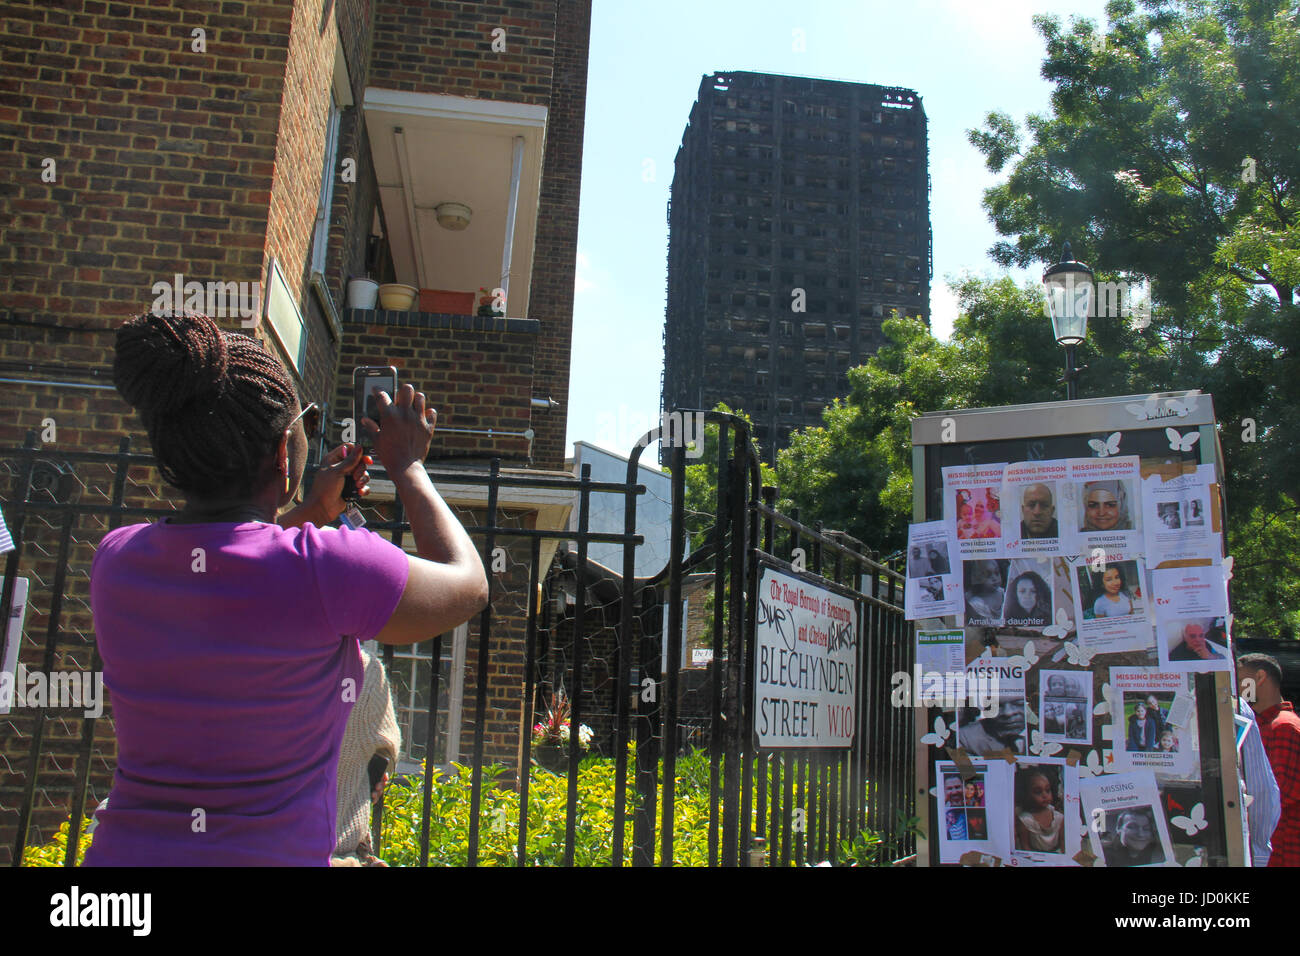 London, UK. 16th June, 2017. A woman takes photos of the charred remains of the 24-storey block Grenfell tower block. At least 30 people have bene confirmed dead with about 70 missing and feared dead. Credit: David Mbiyu/Alamy Live News  Stock Photo